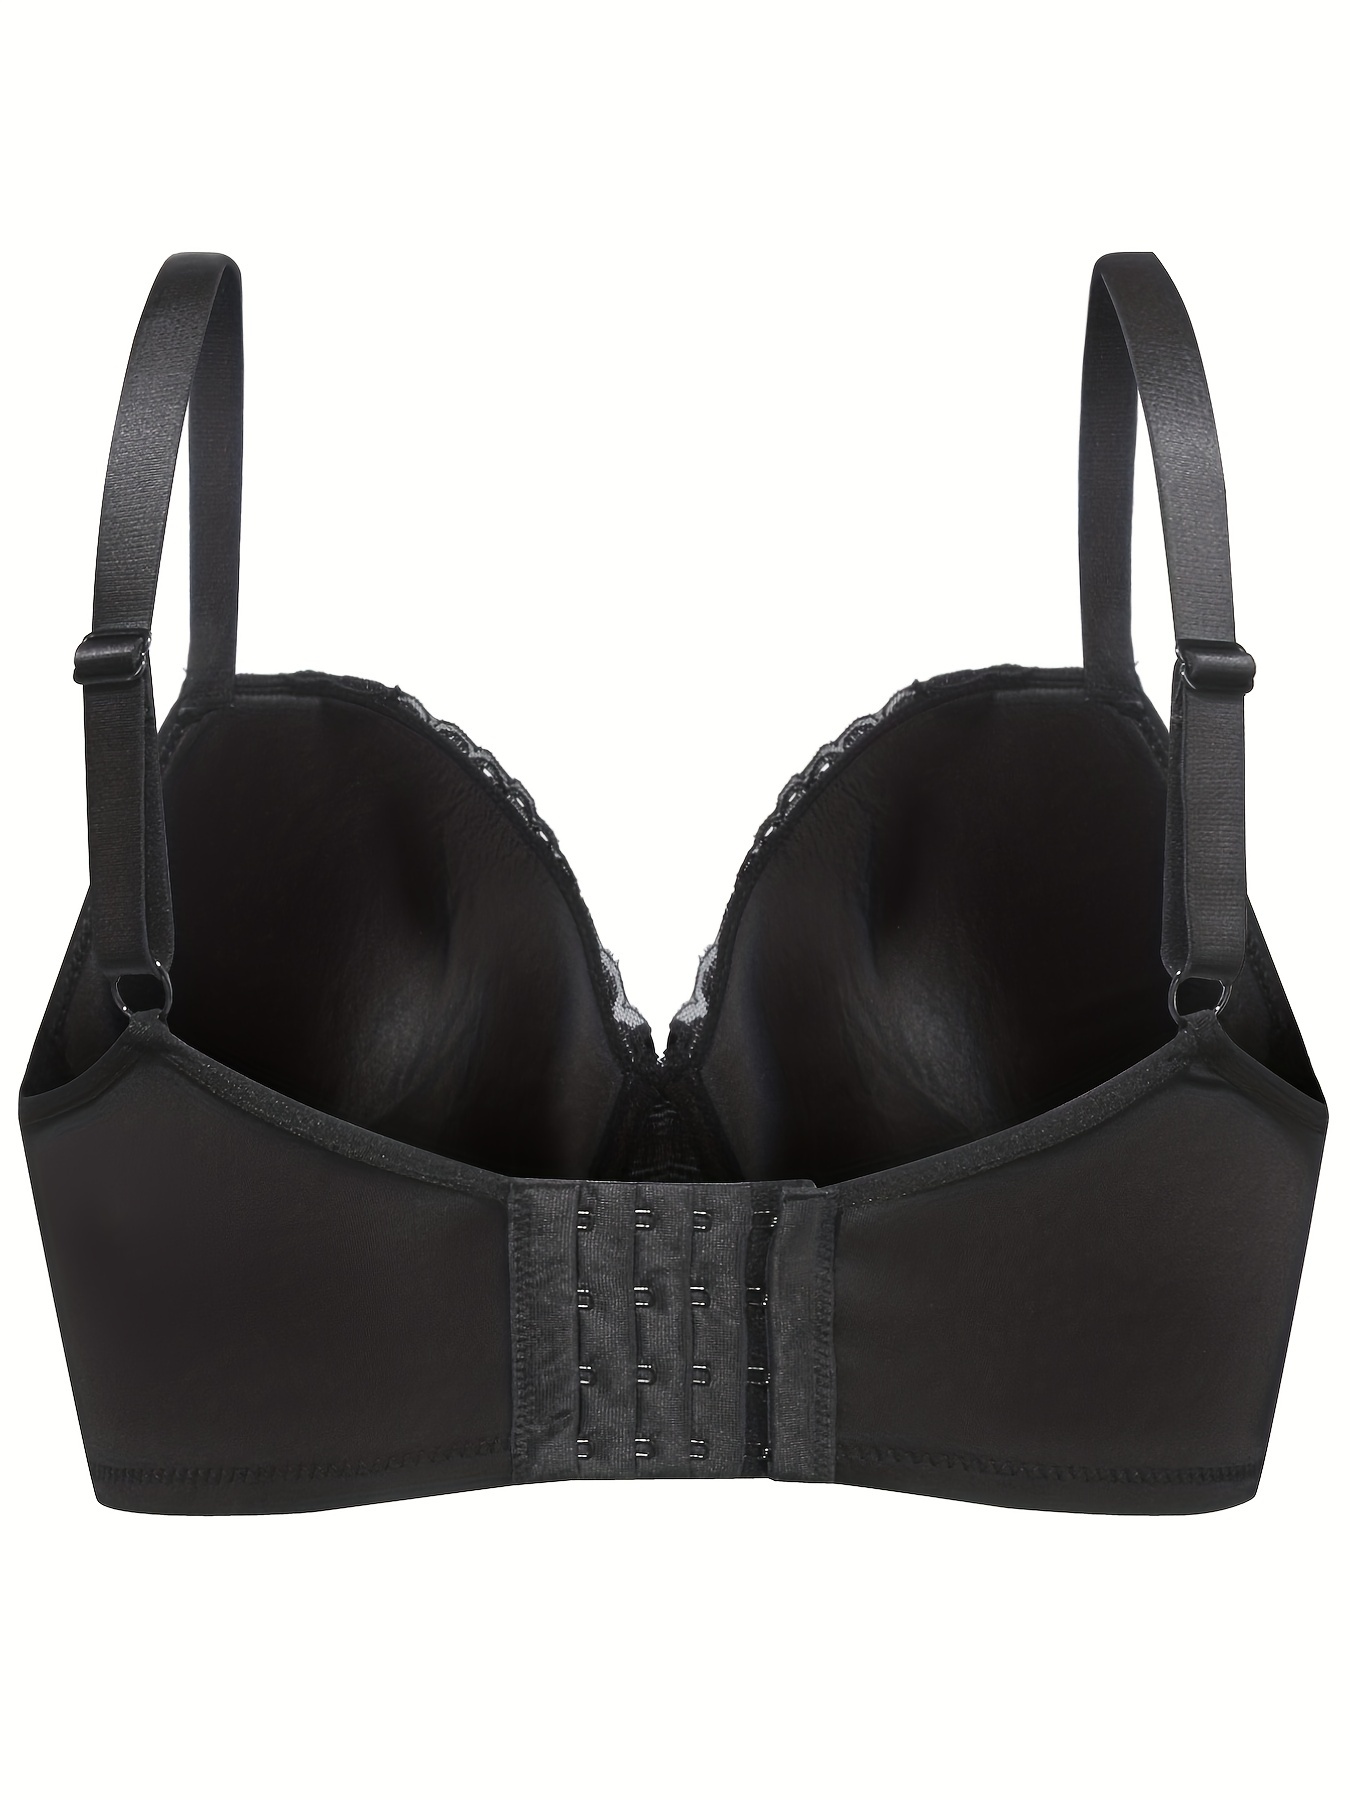 Women's Stunning Push-up Bra With Lace In Black Size 44dd 